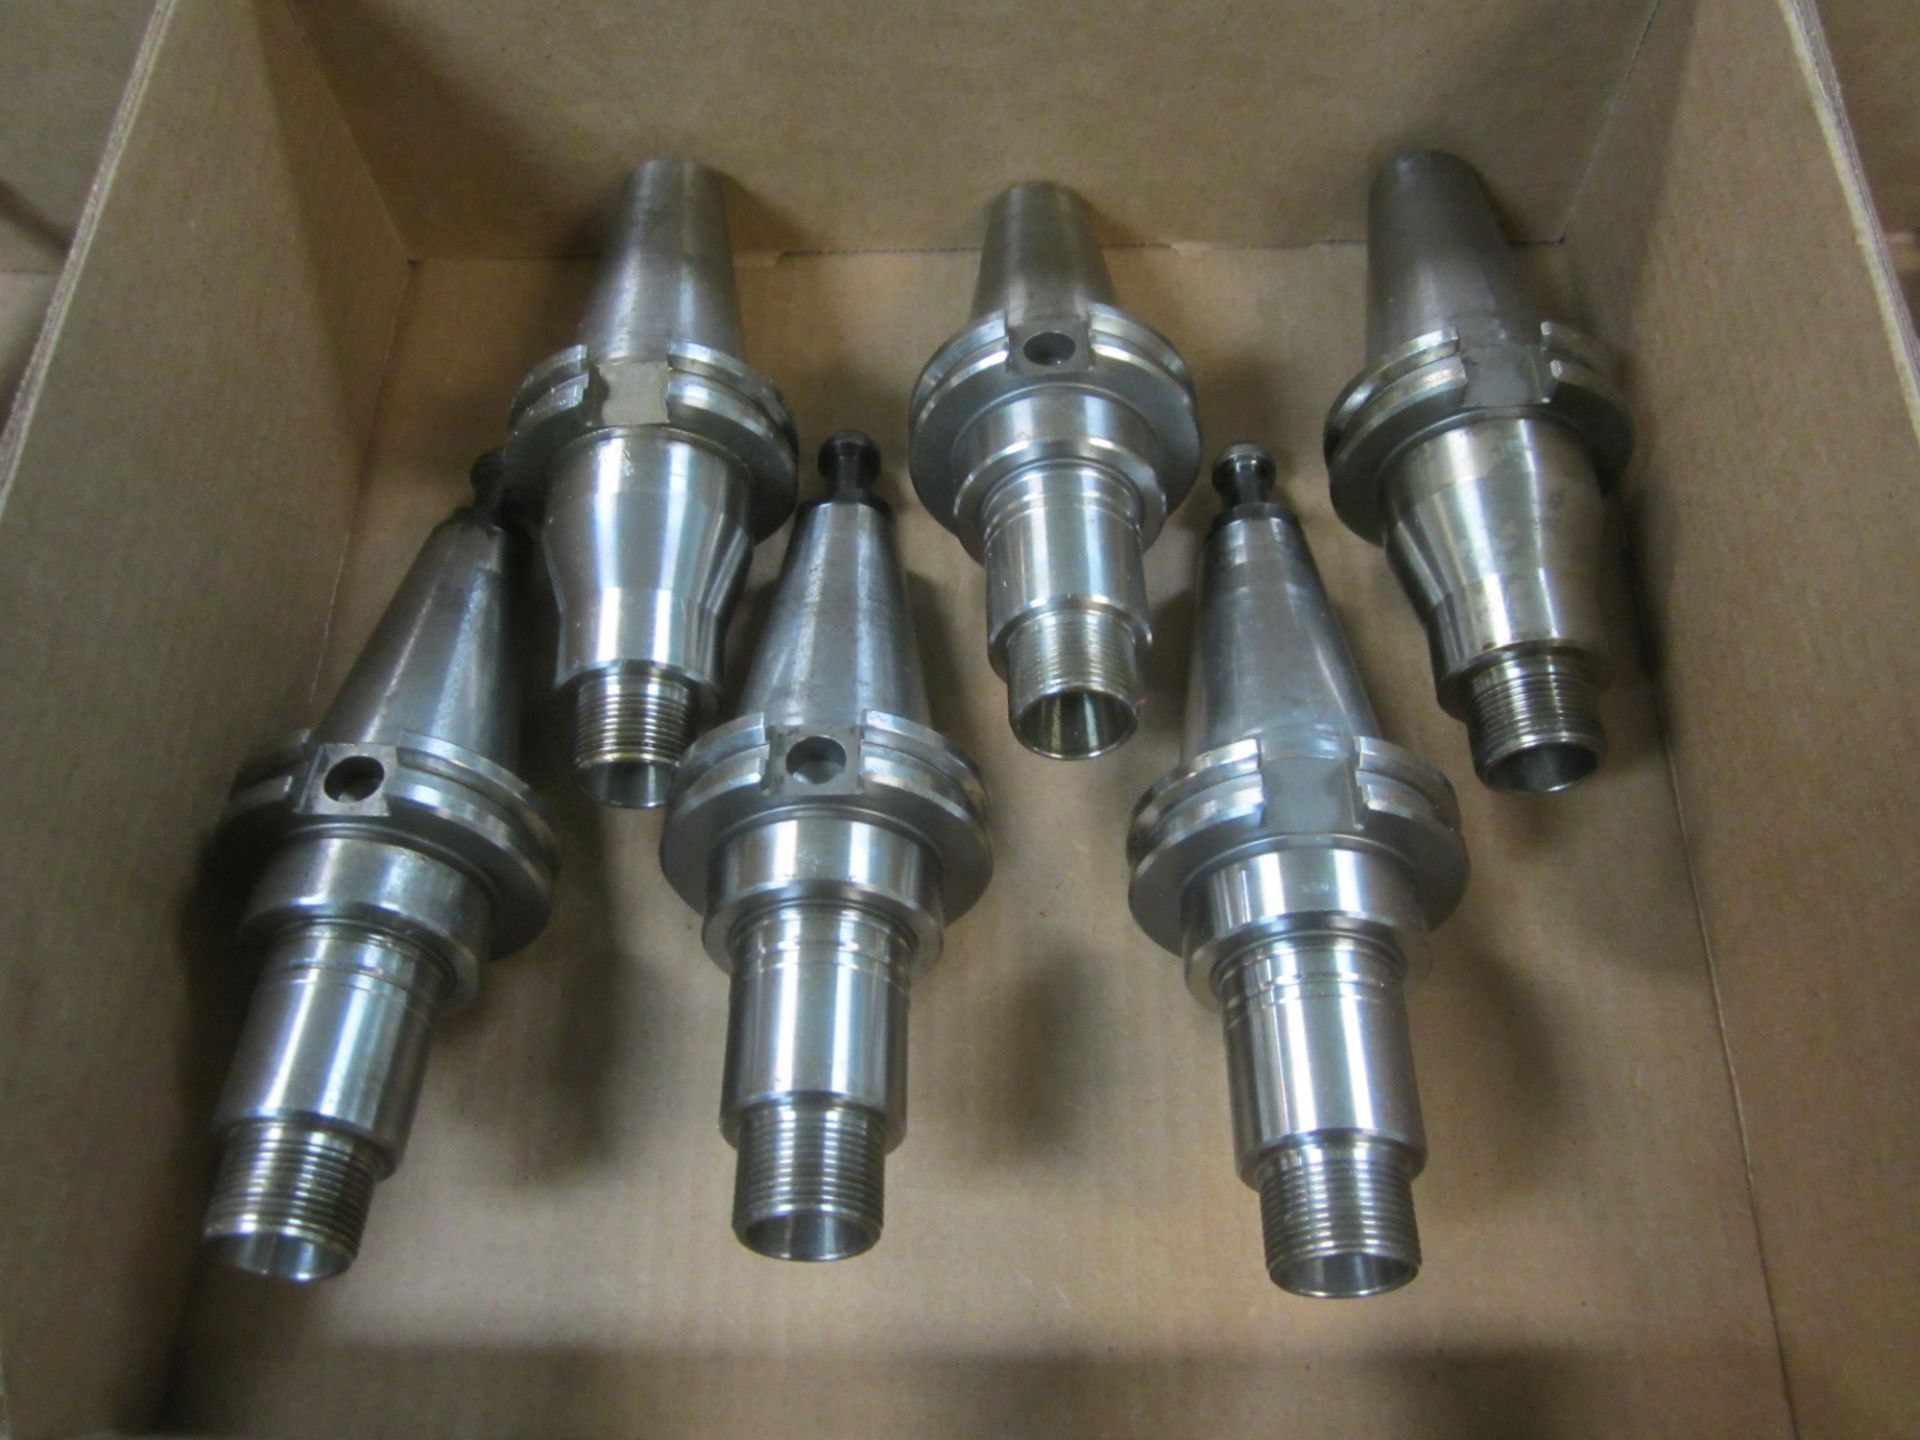 (6) Cat 40 Collet Holders for ER20 Collets, No Screw Caps